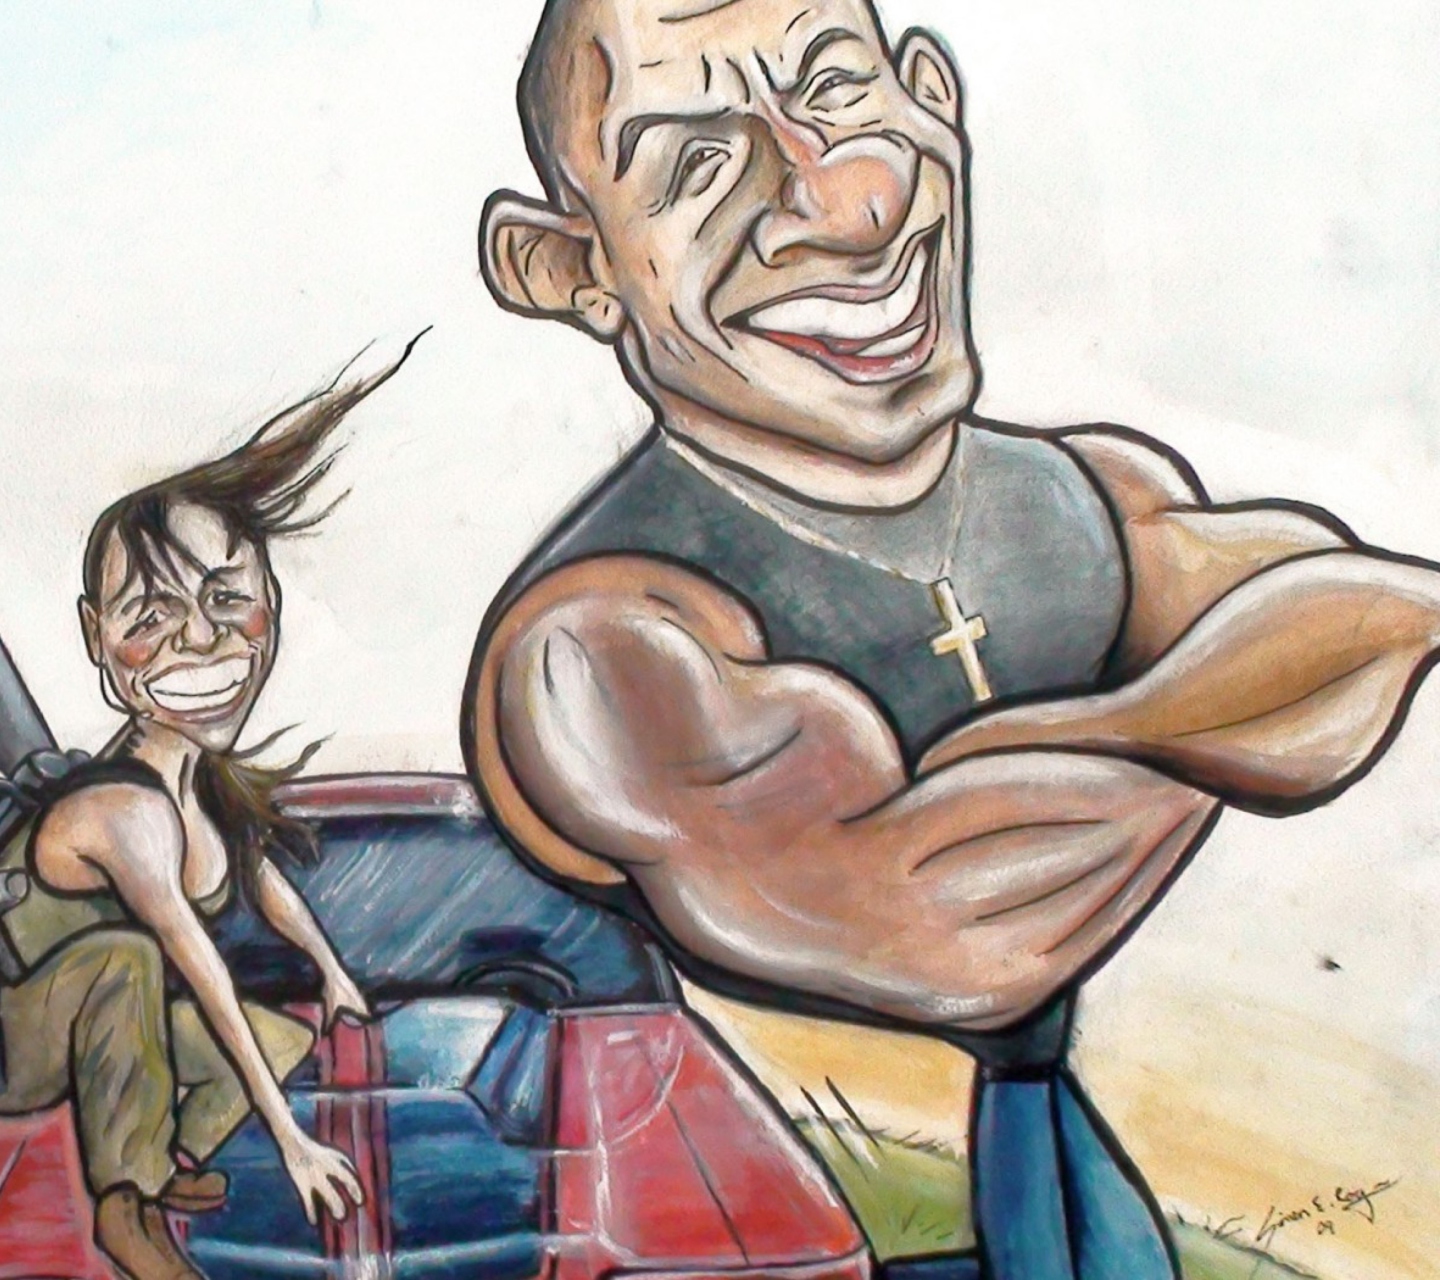 Das Vin Diesel Drawing - Fast And Furious Wallpaper 1440x1280